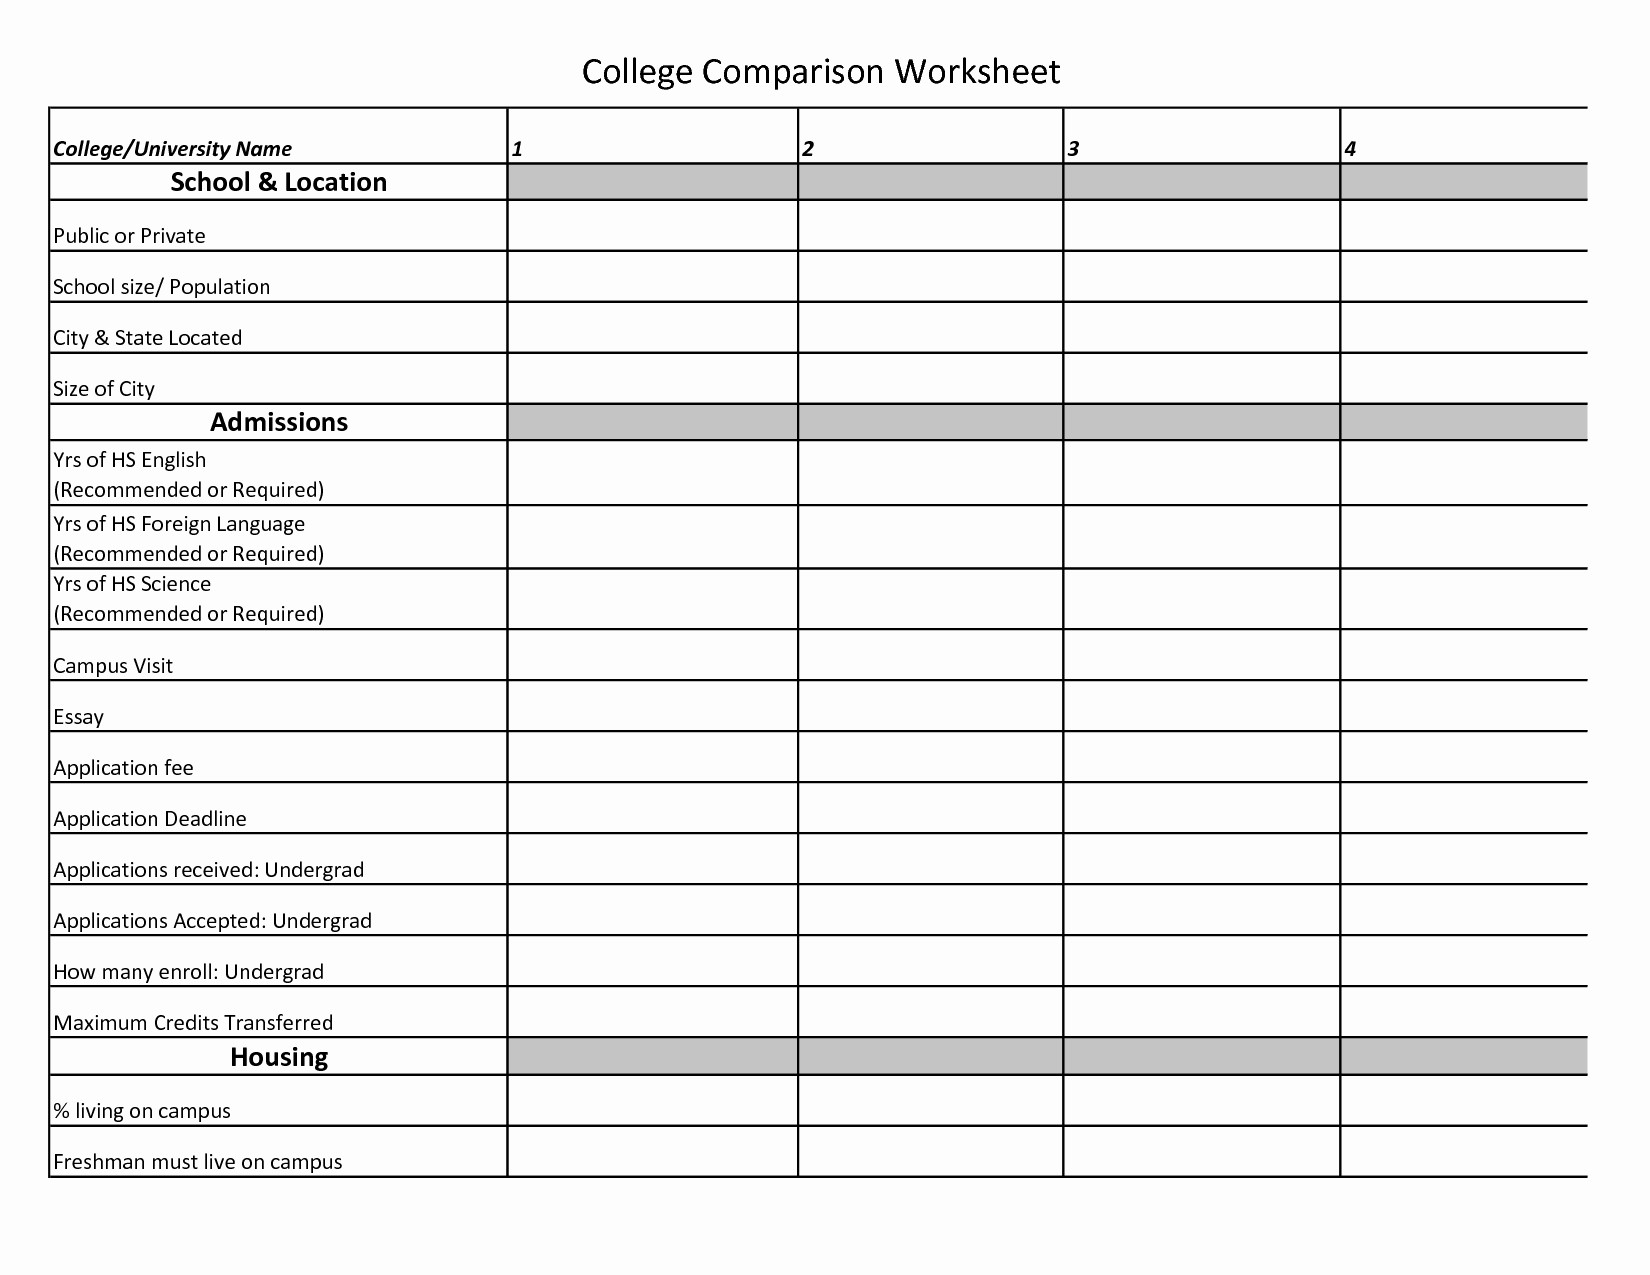 College Comparison Worksheet Template Lovely Cost Parison Document